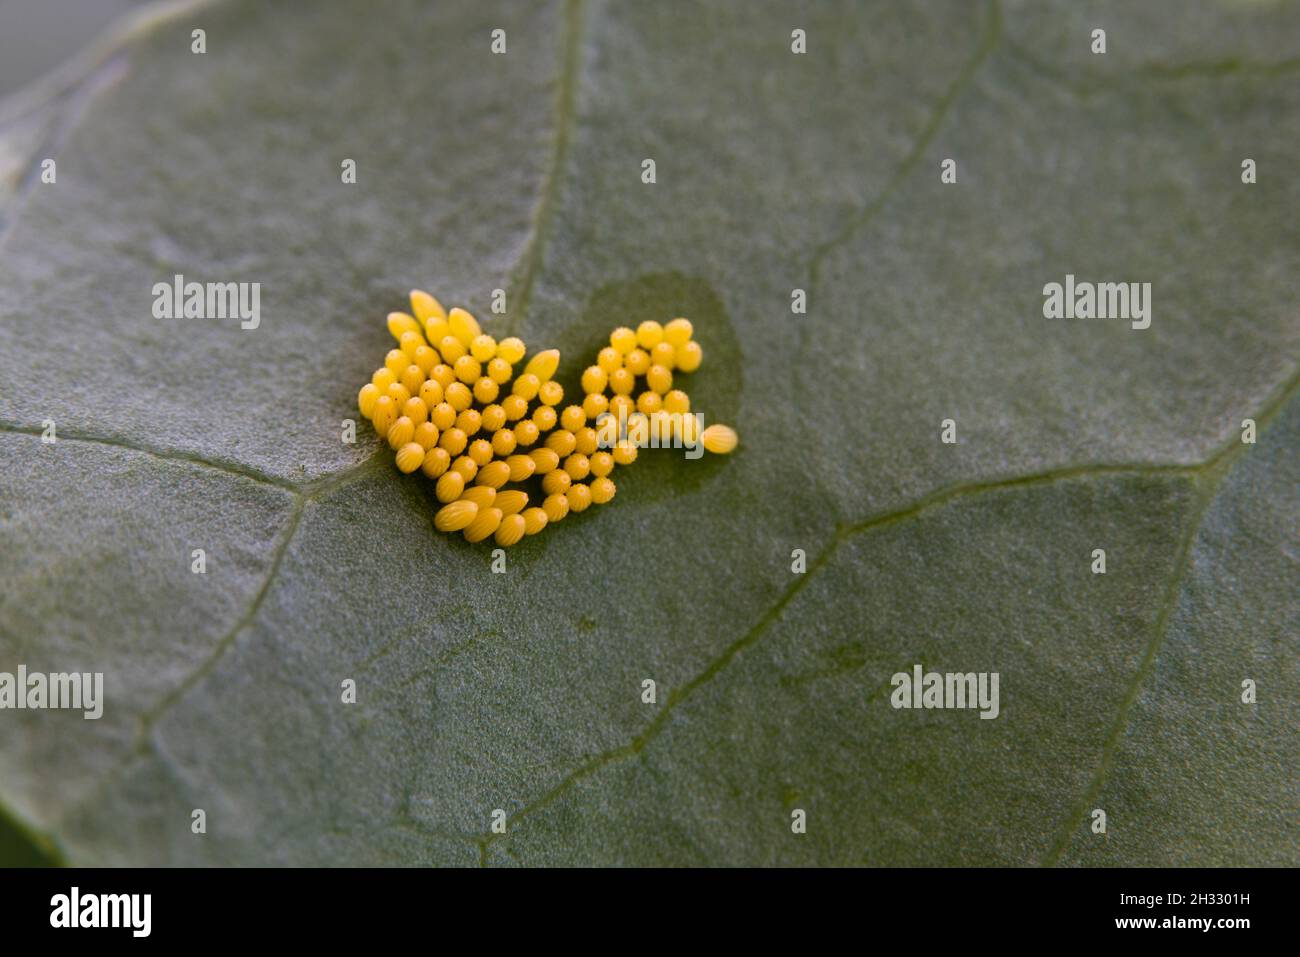 Eggs of the large white cabbage butterfly (Pieris brassicae) on the underside of a brassica leaf. Stock Photo